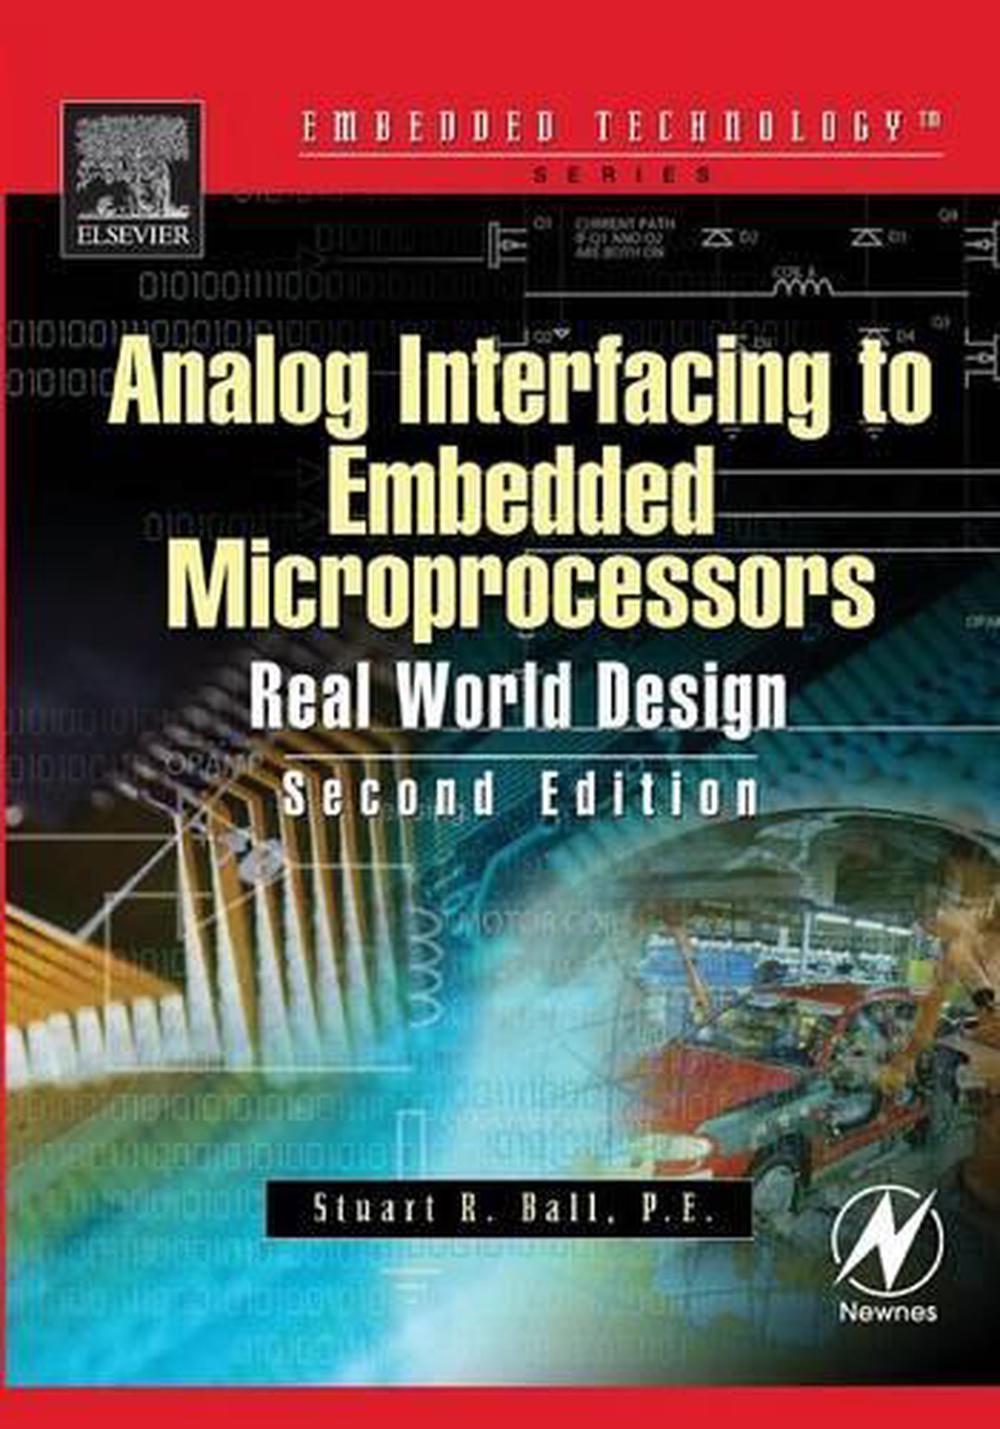 Analog Interfacing to Embedded Microprocessor Systems Real World